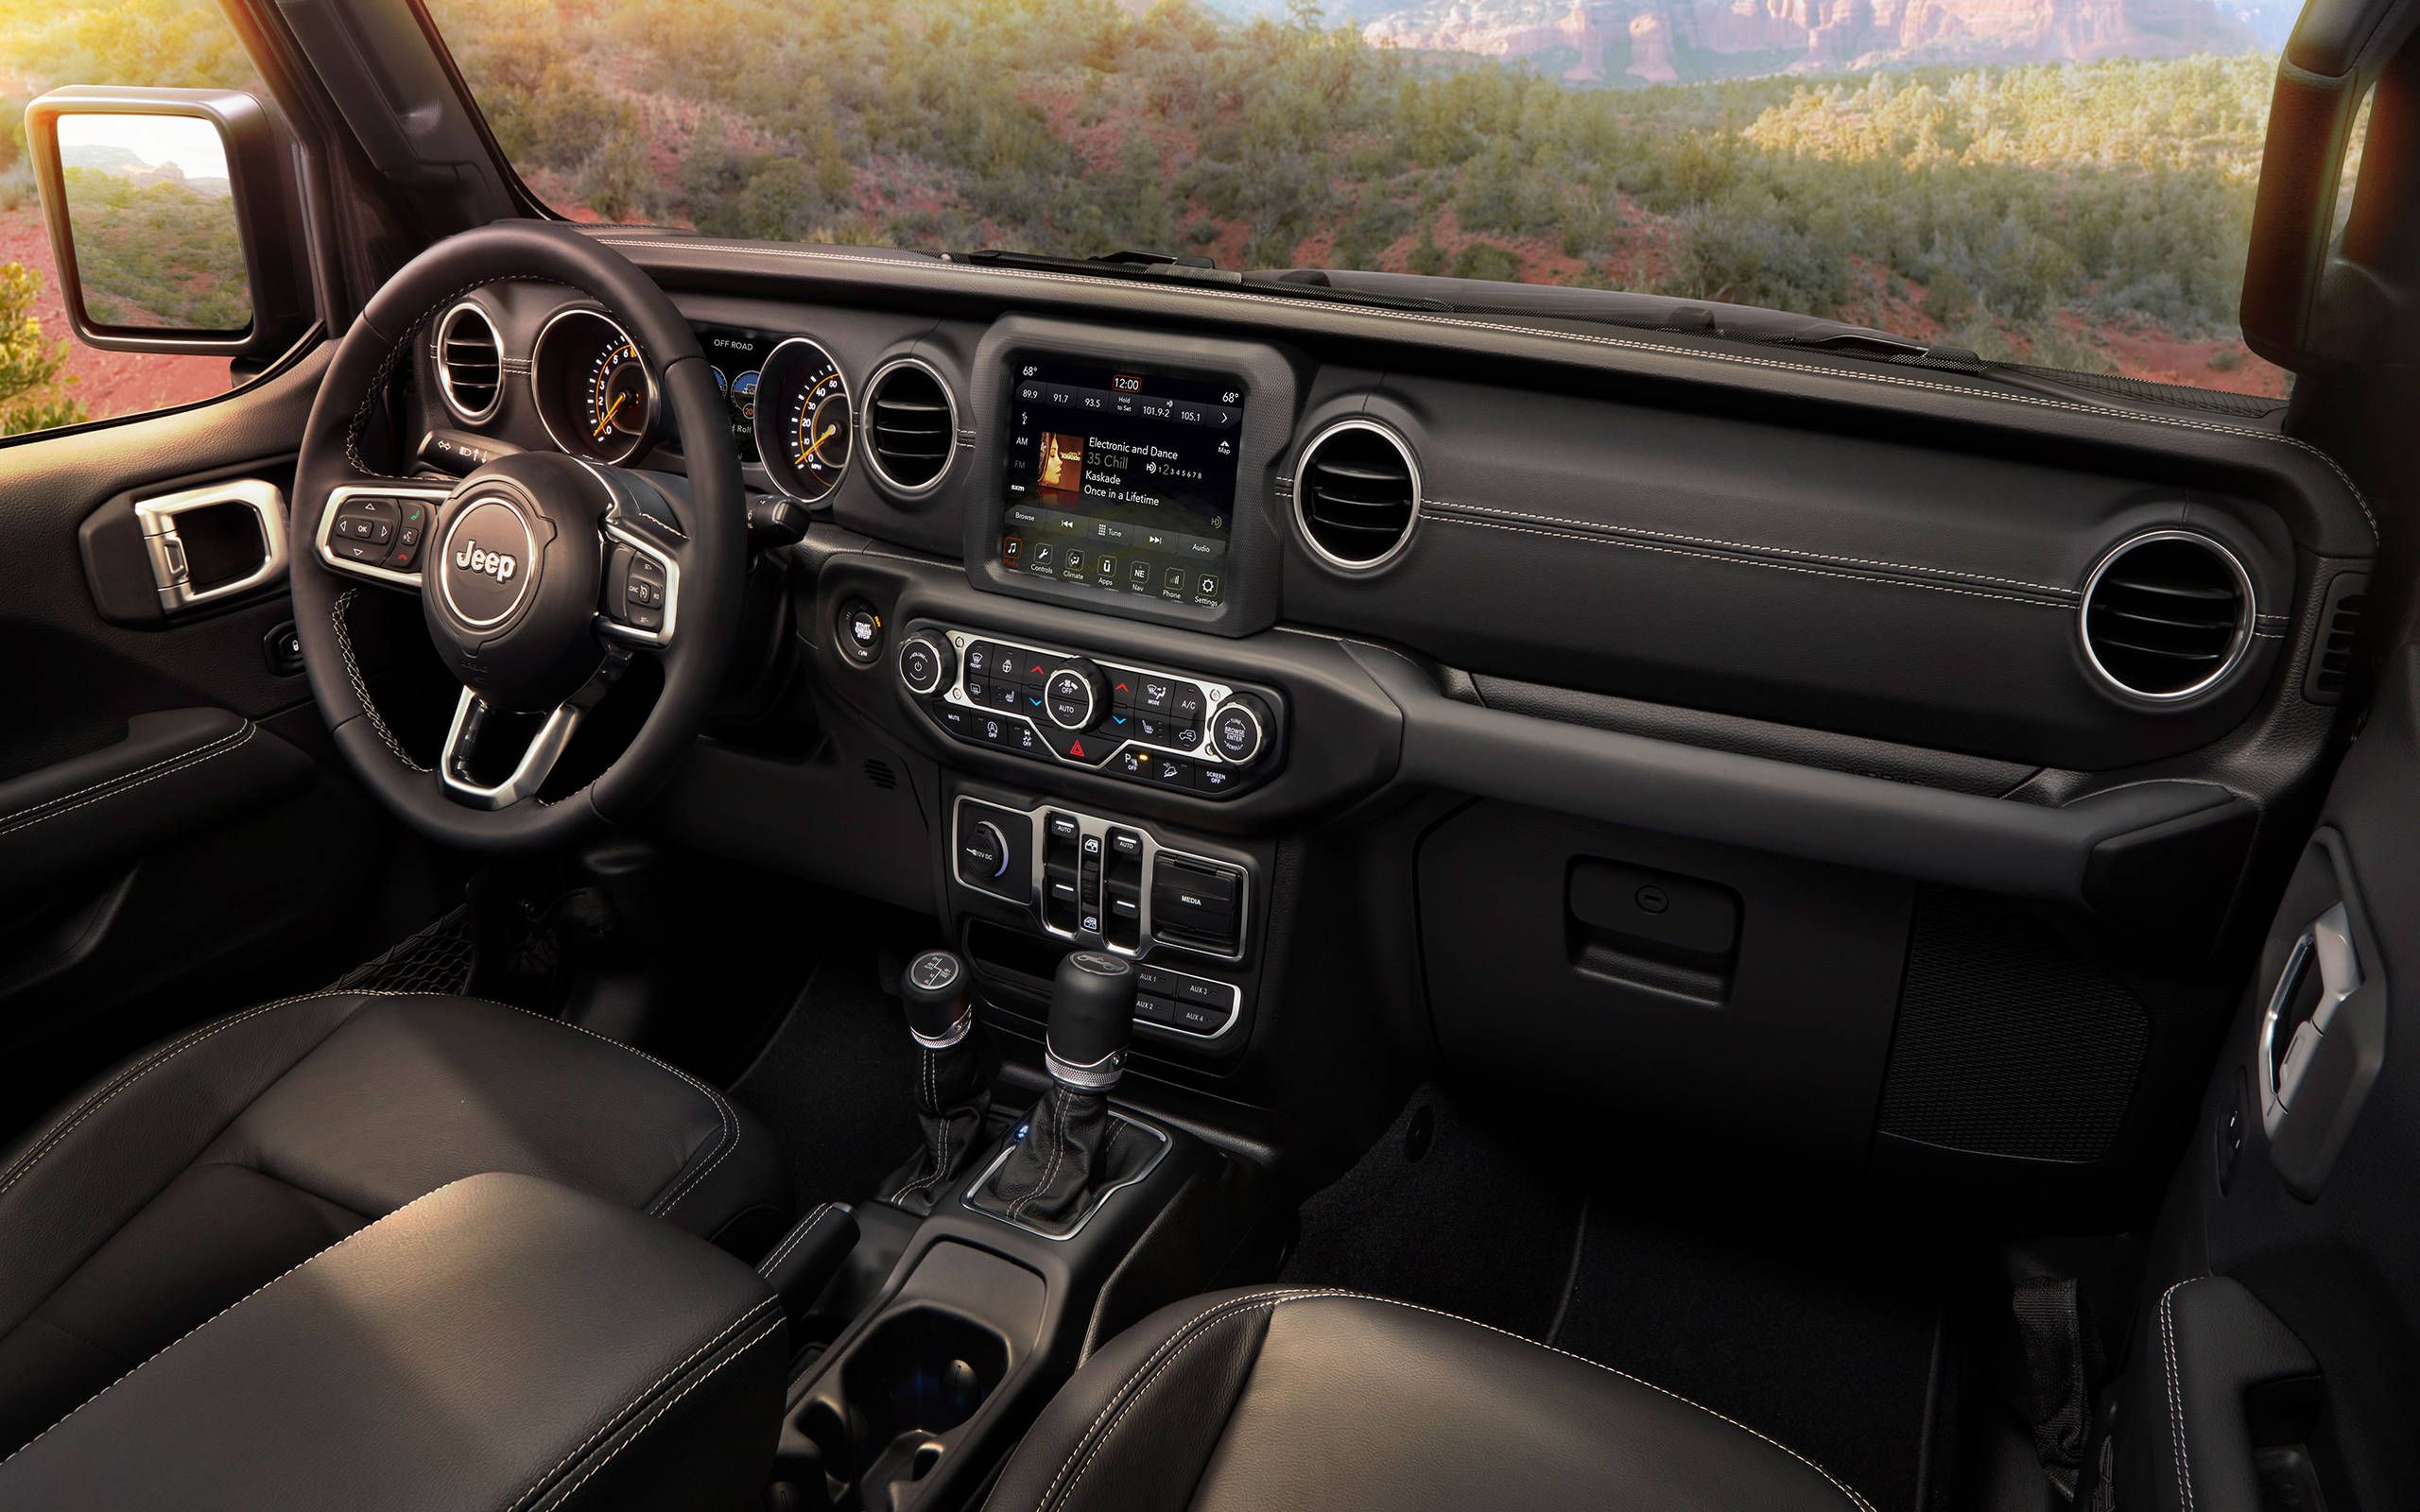 Gallery: Inside the 2018 Jeep Wrangler JL two-door and Unlimited